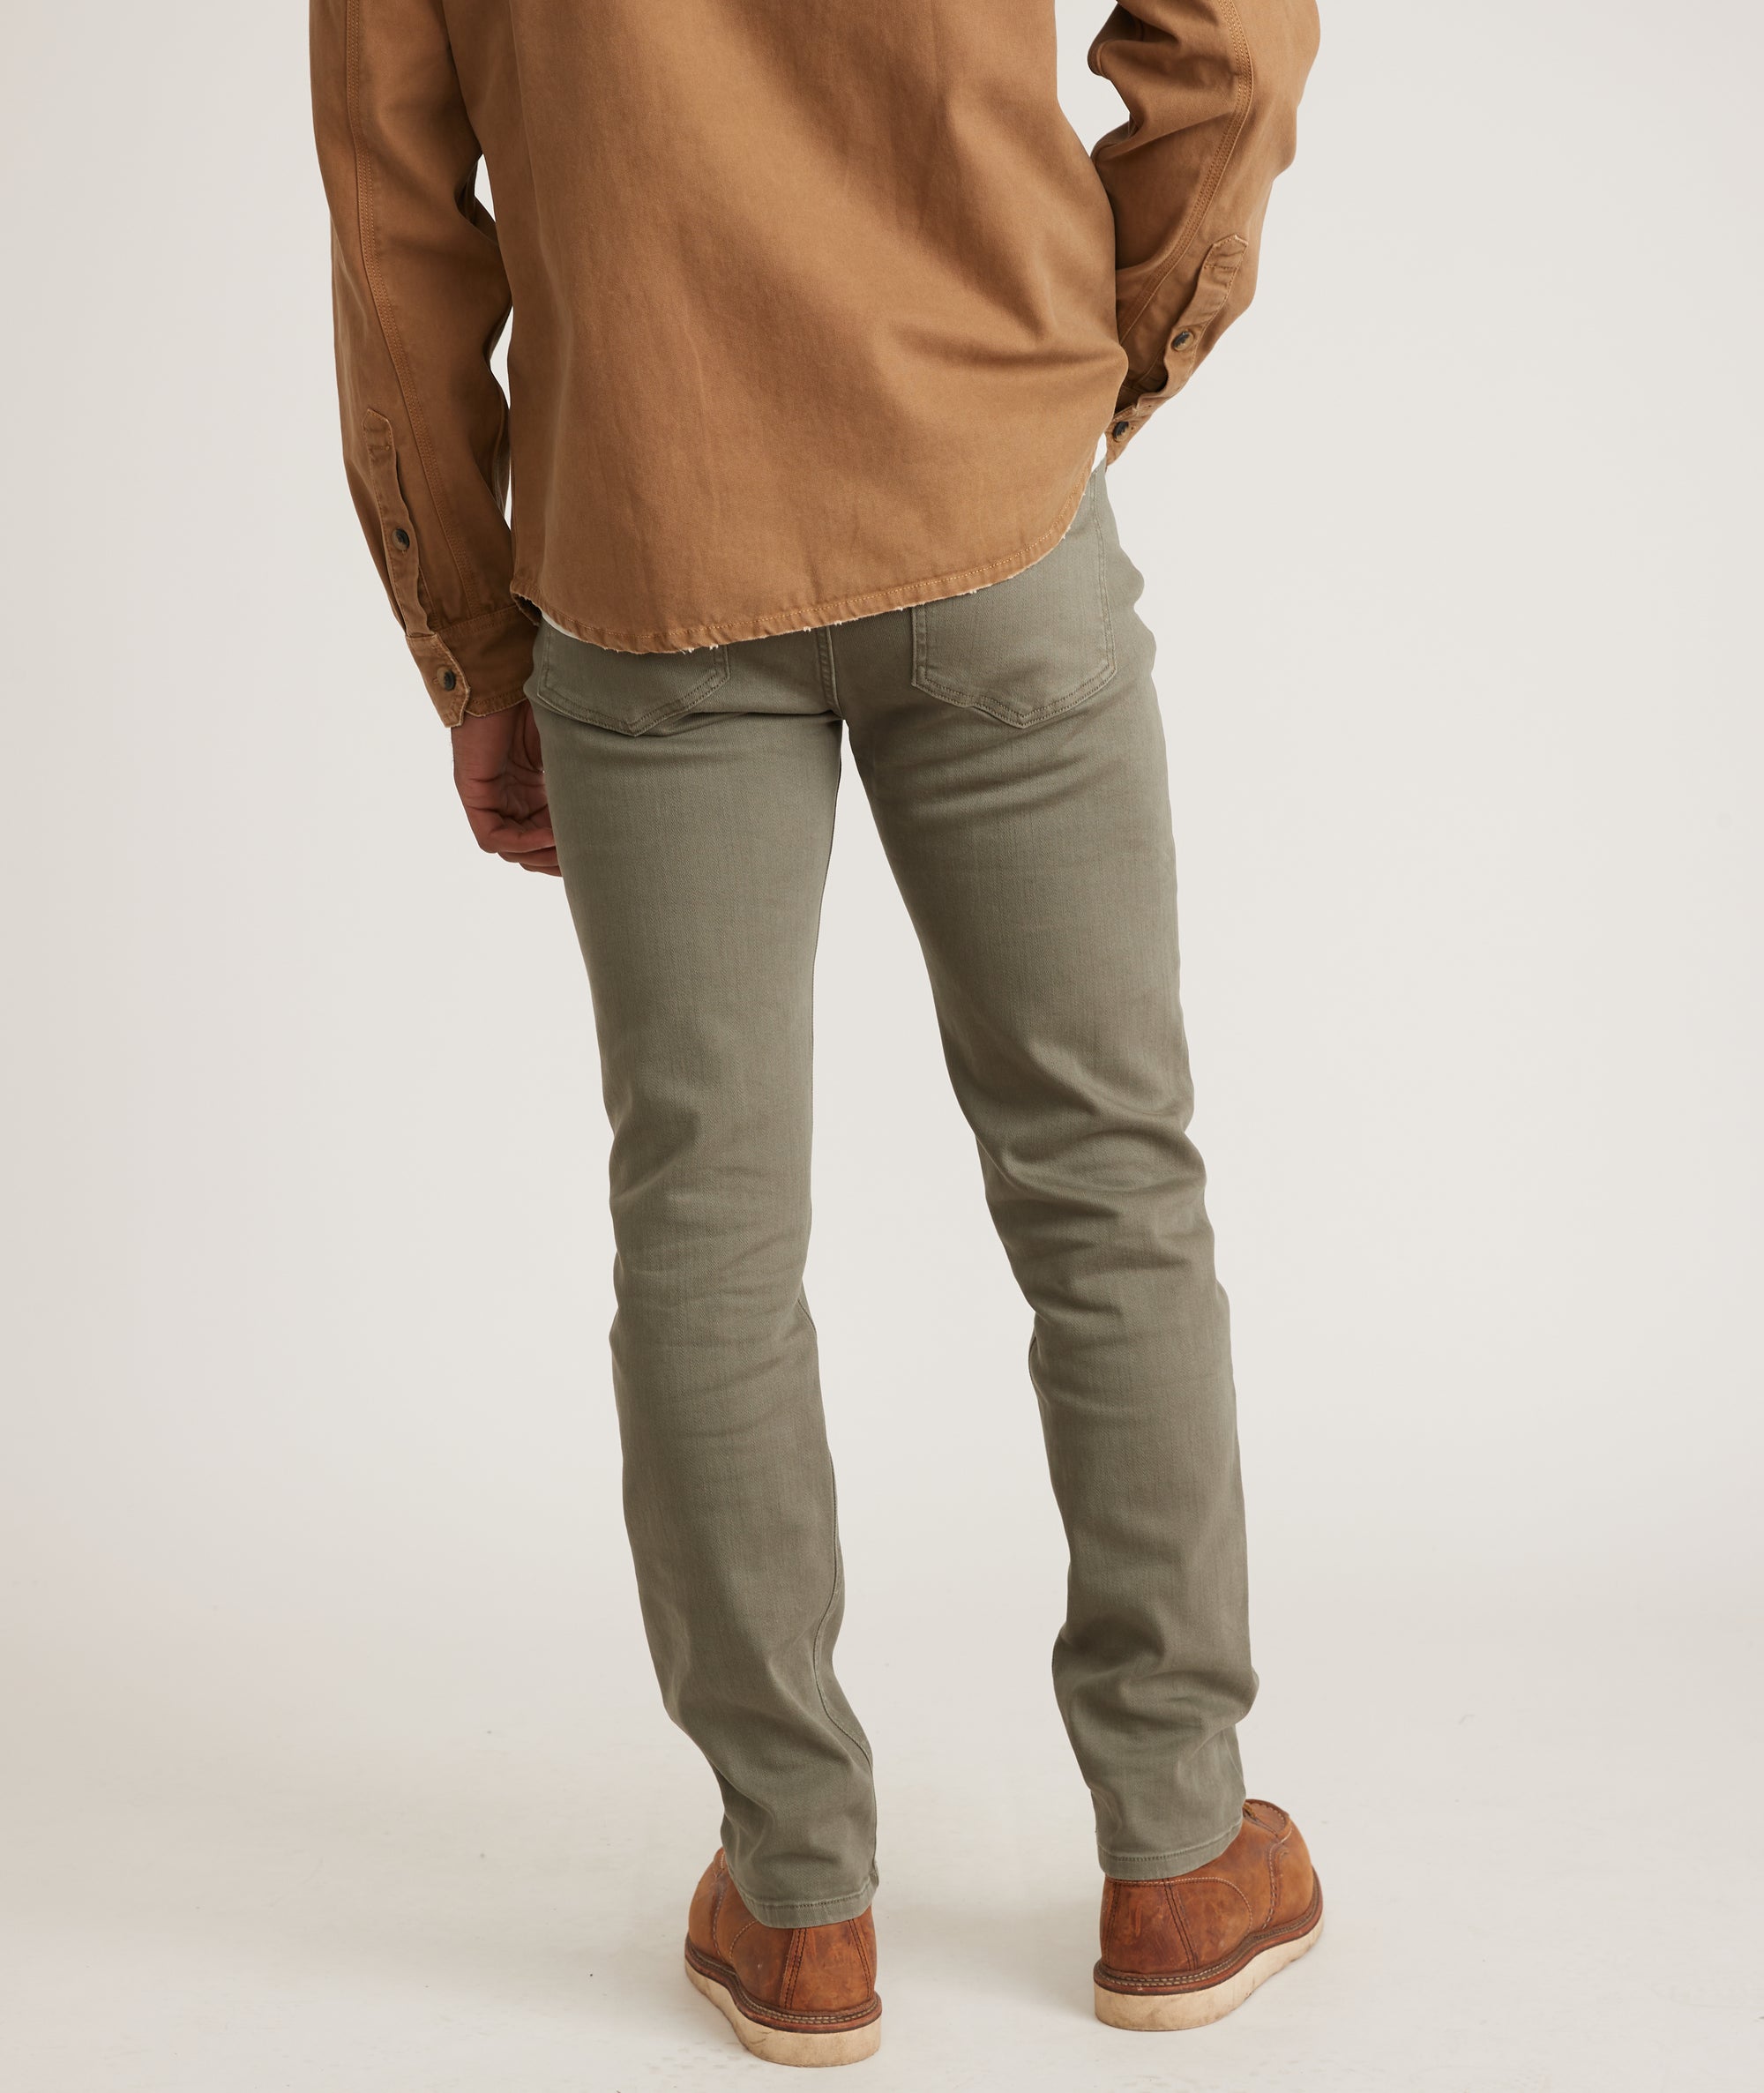 in 5 Marine Olive Layer Faded Fit Pant Slim Pocket –